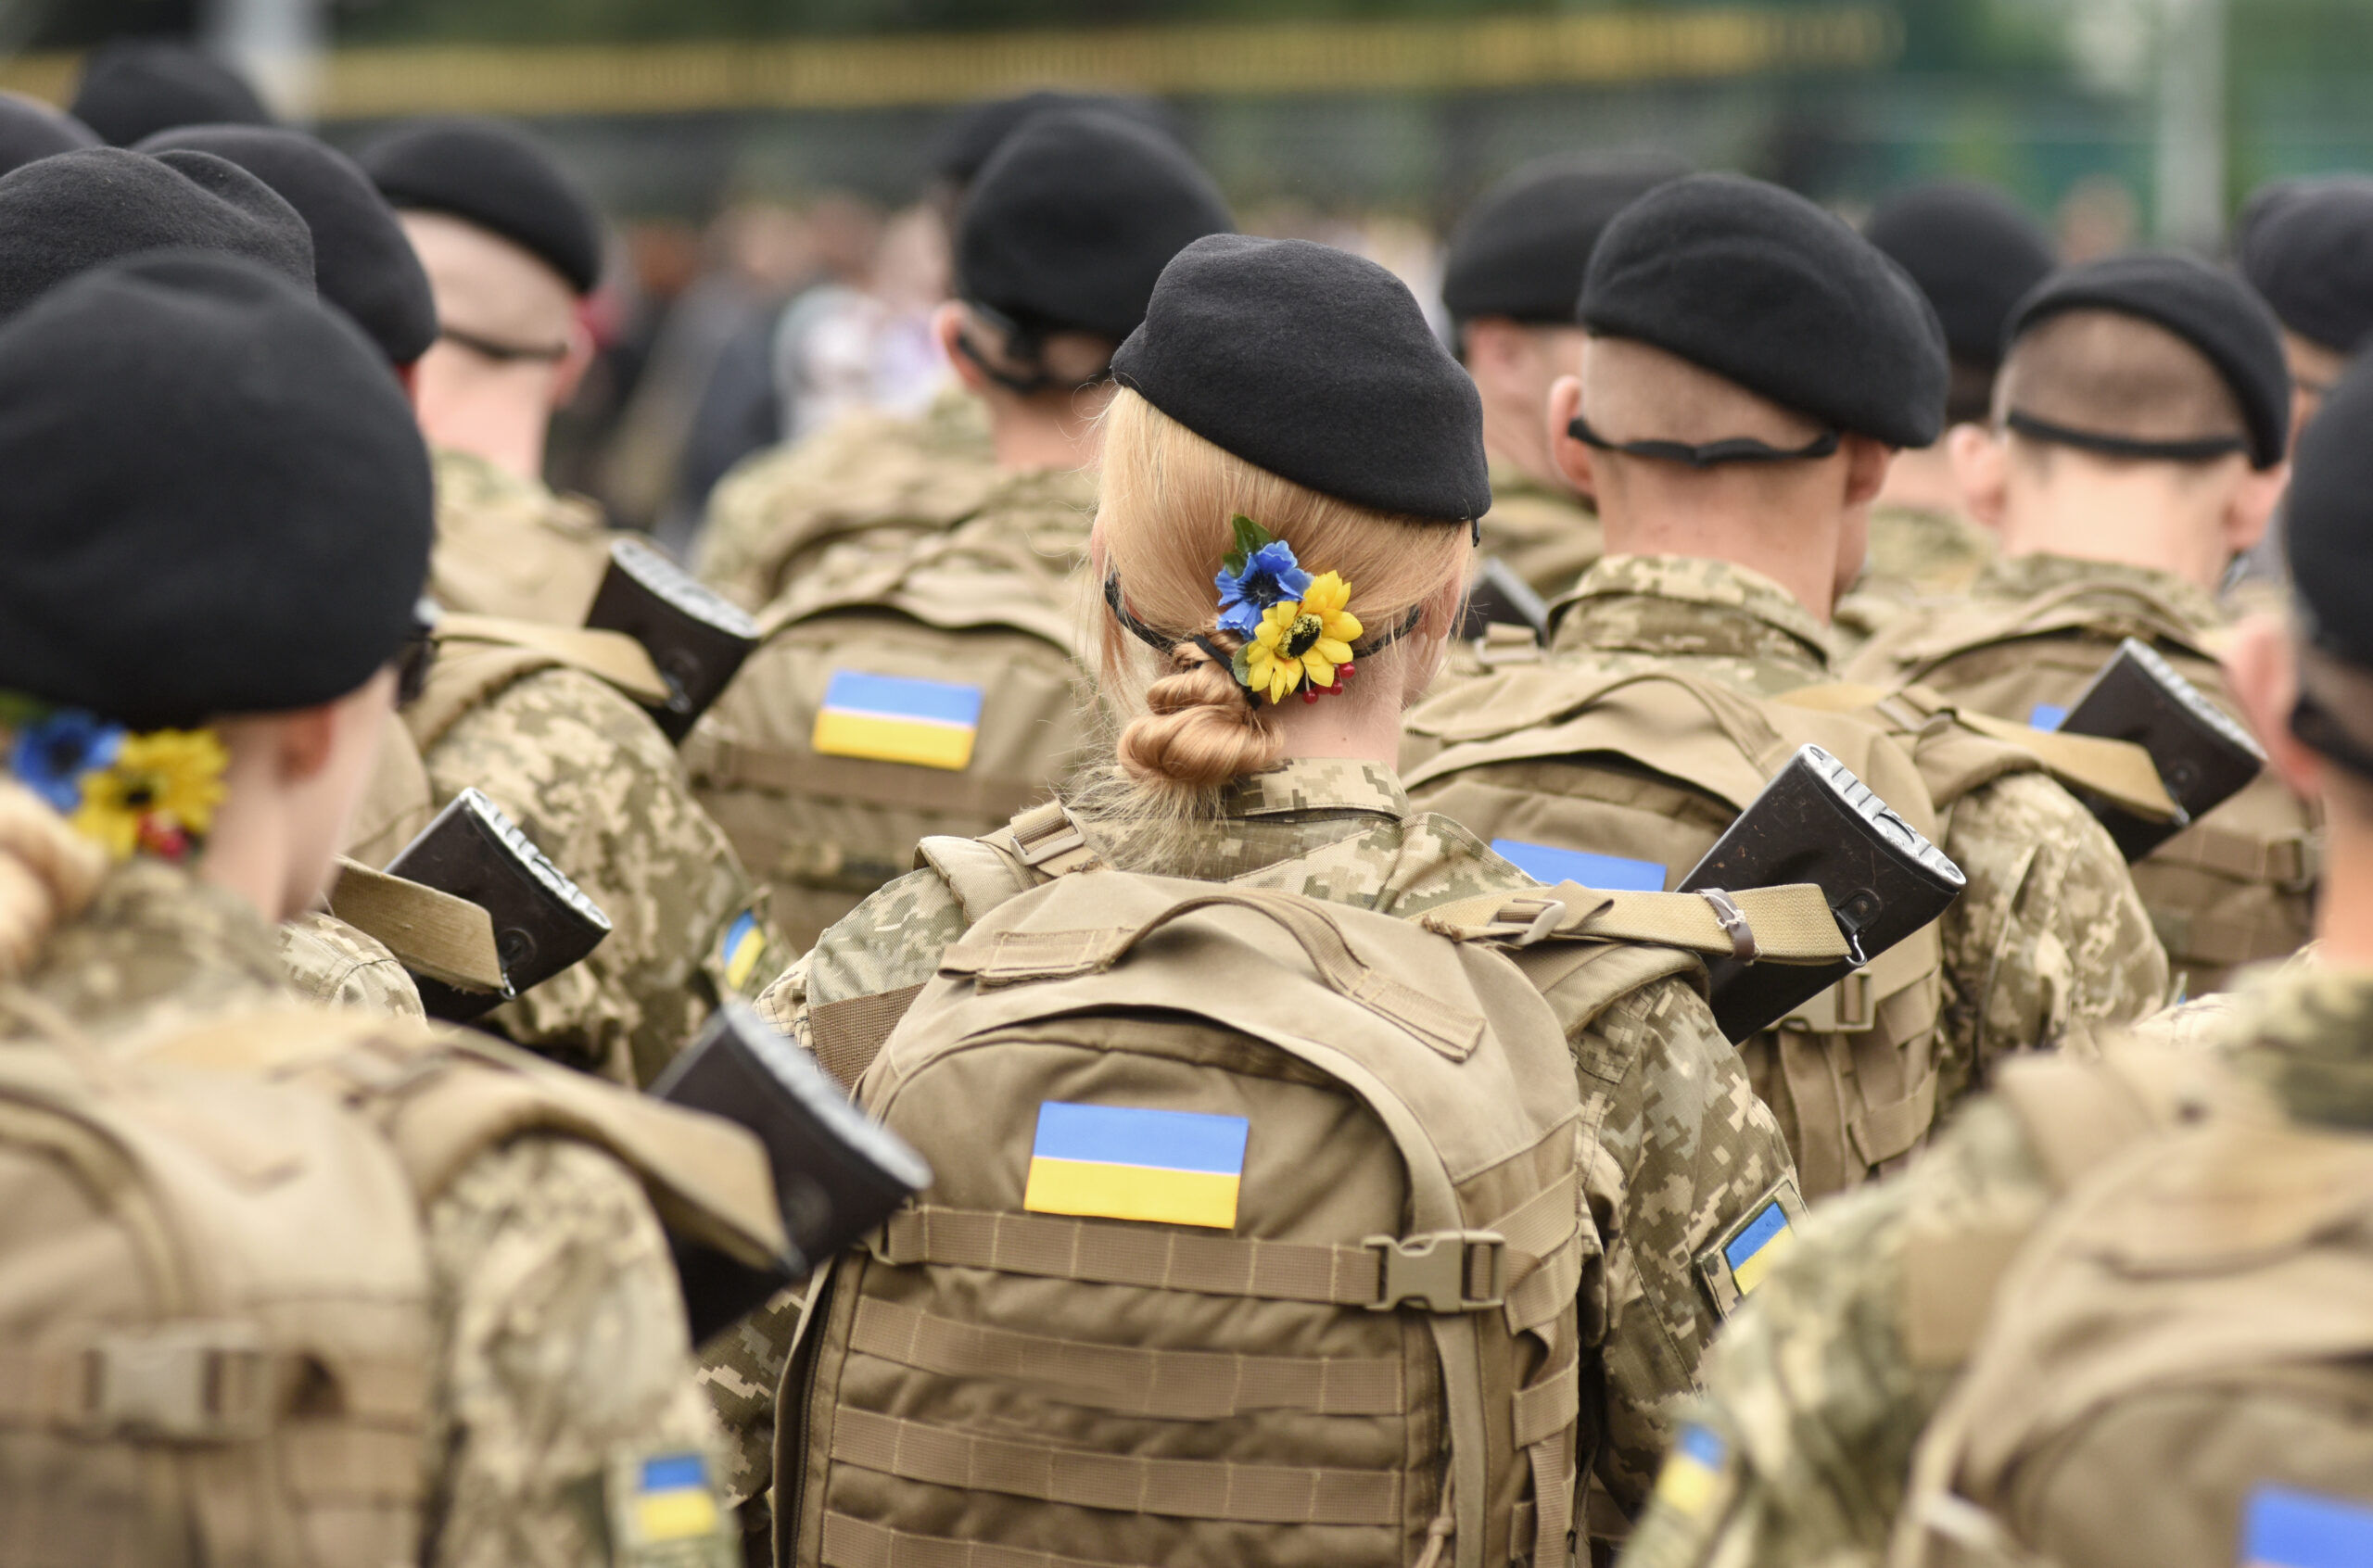 Ukrainian soldiers, Ukraine, Russia, war, army, military, gay, LGBTQ, queer, Woman,Soldier.,Woman,In,Army.,Ukrainian,Flag,On,Military,Uniform.